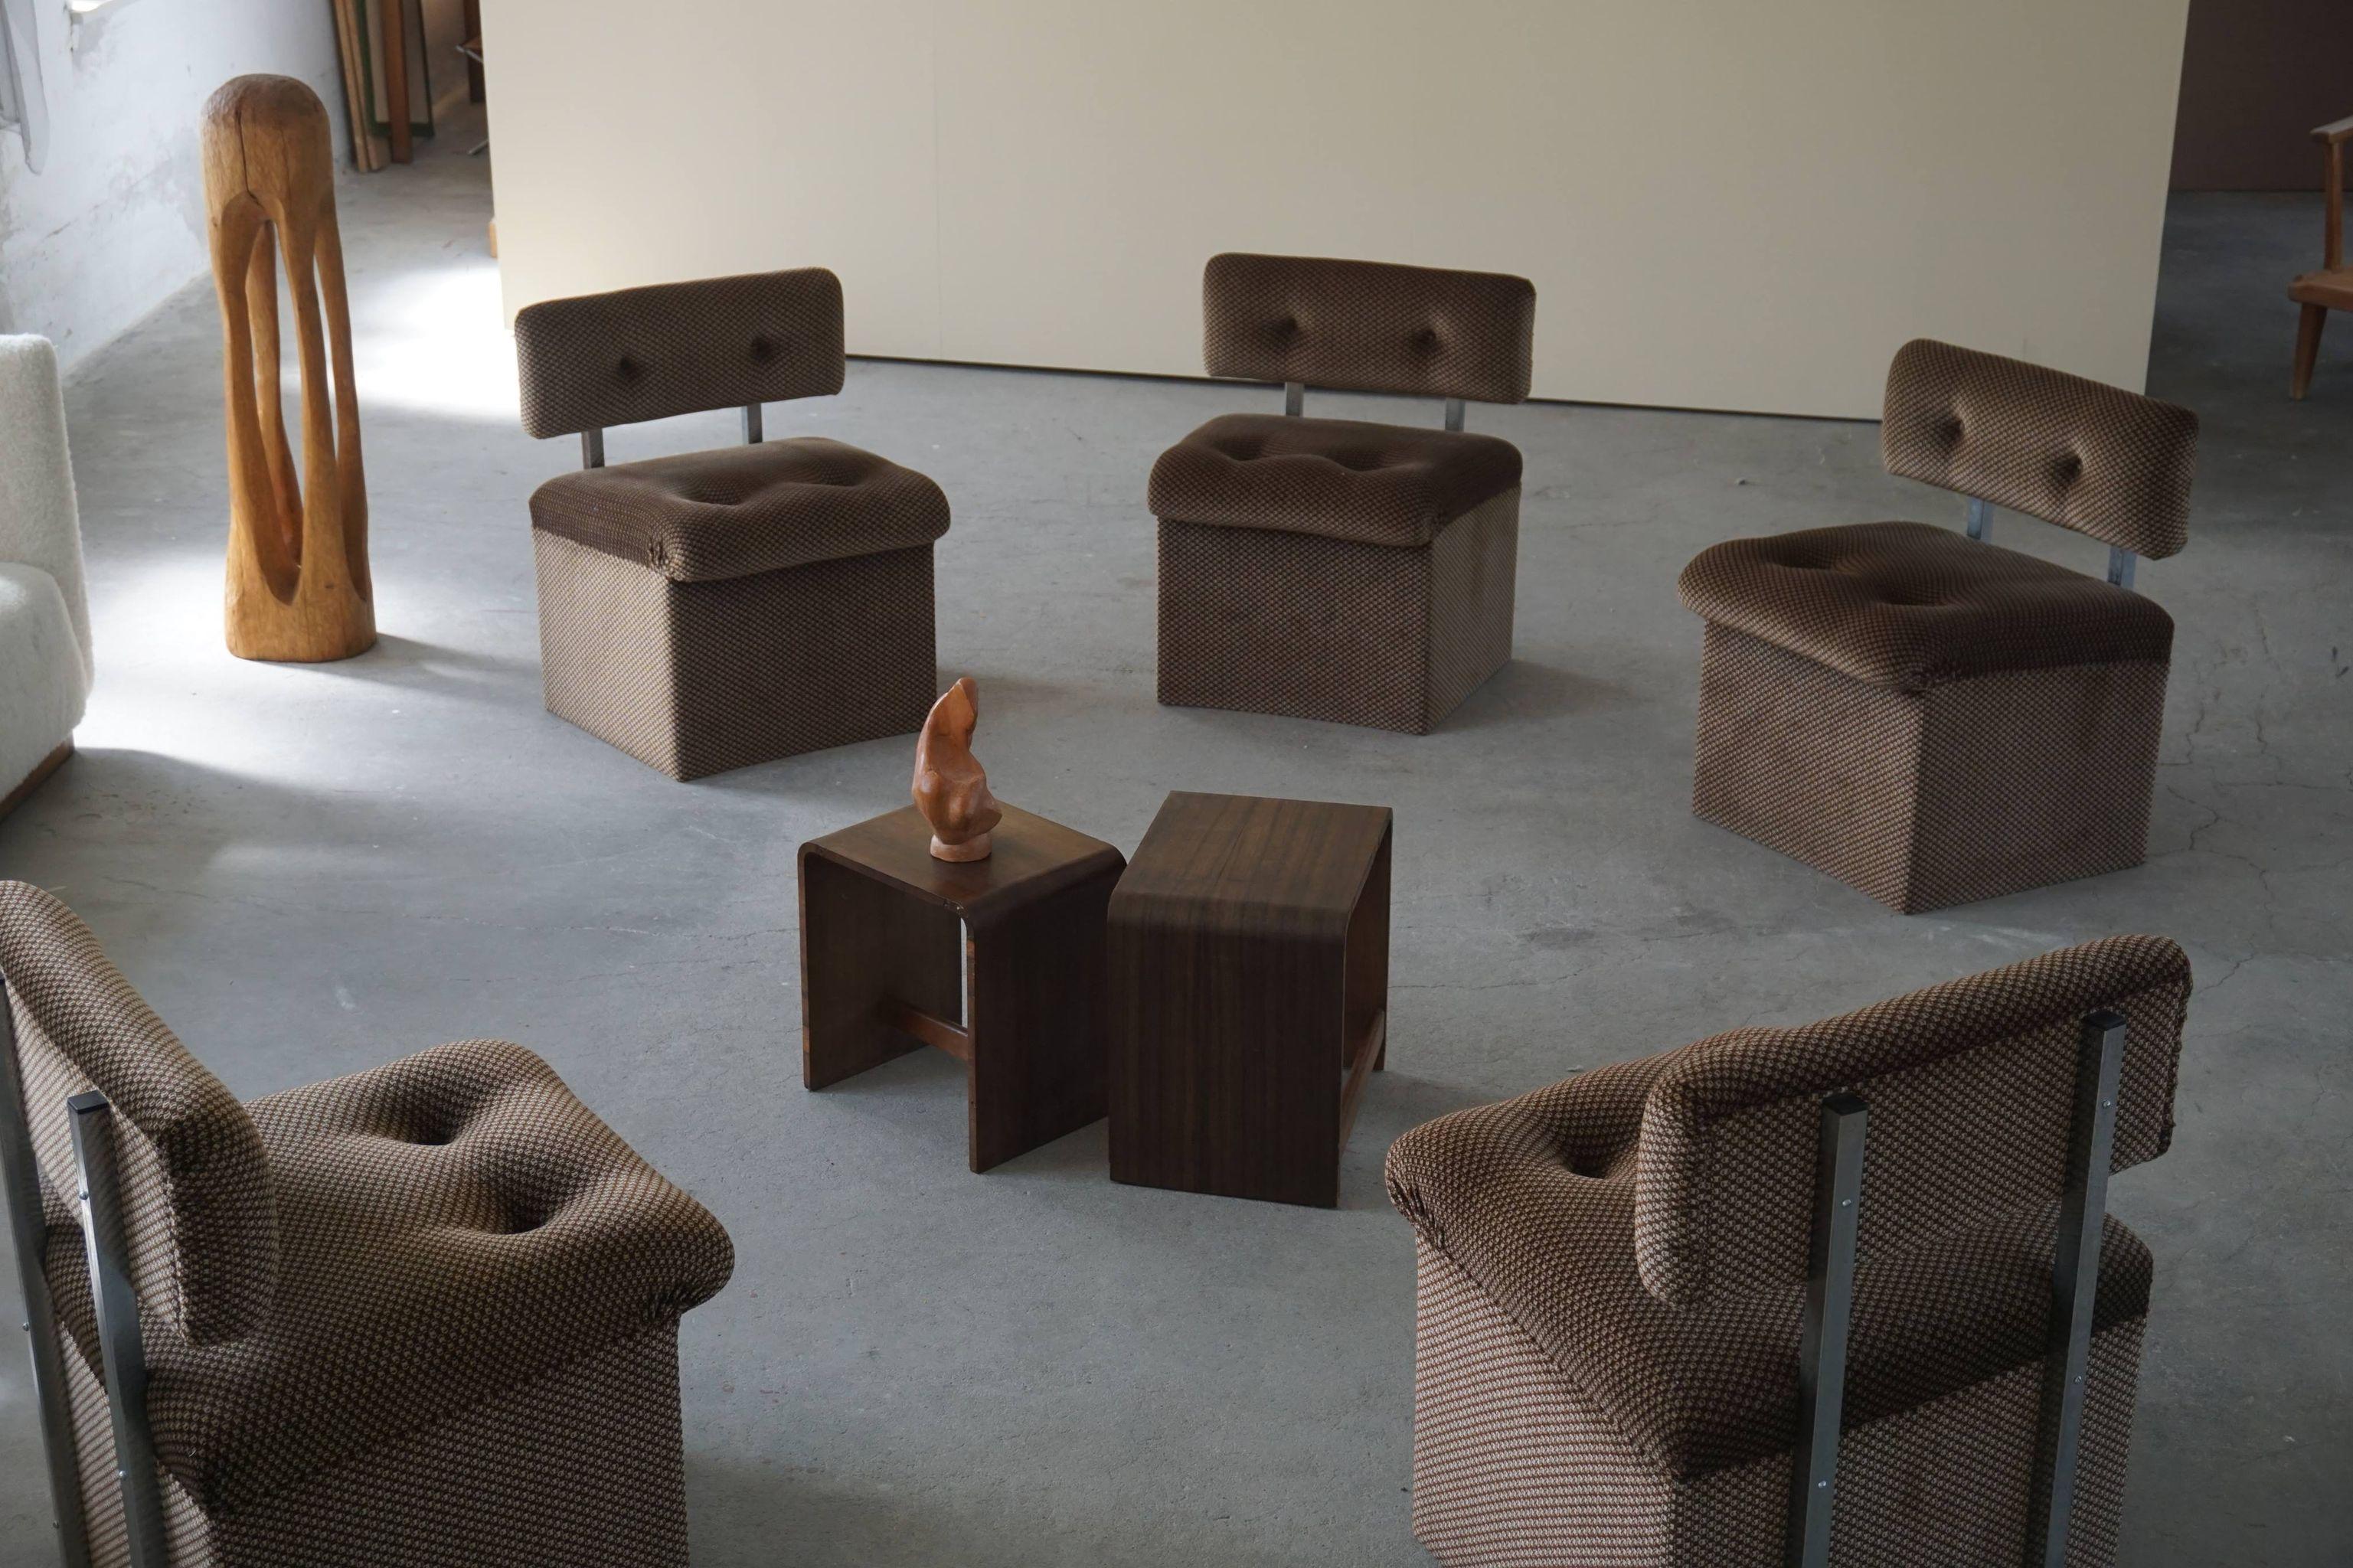 Set of 5 Italian modern modular lounge chairs, late 20th century.
The chairs can also be used at a dining table. 
All chairs are in a great vintage condition.